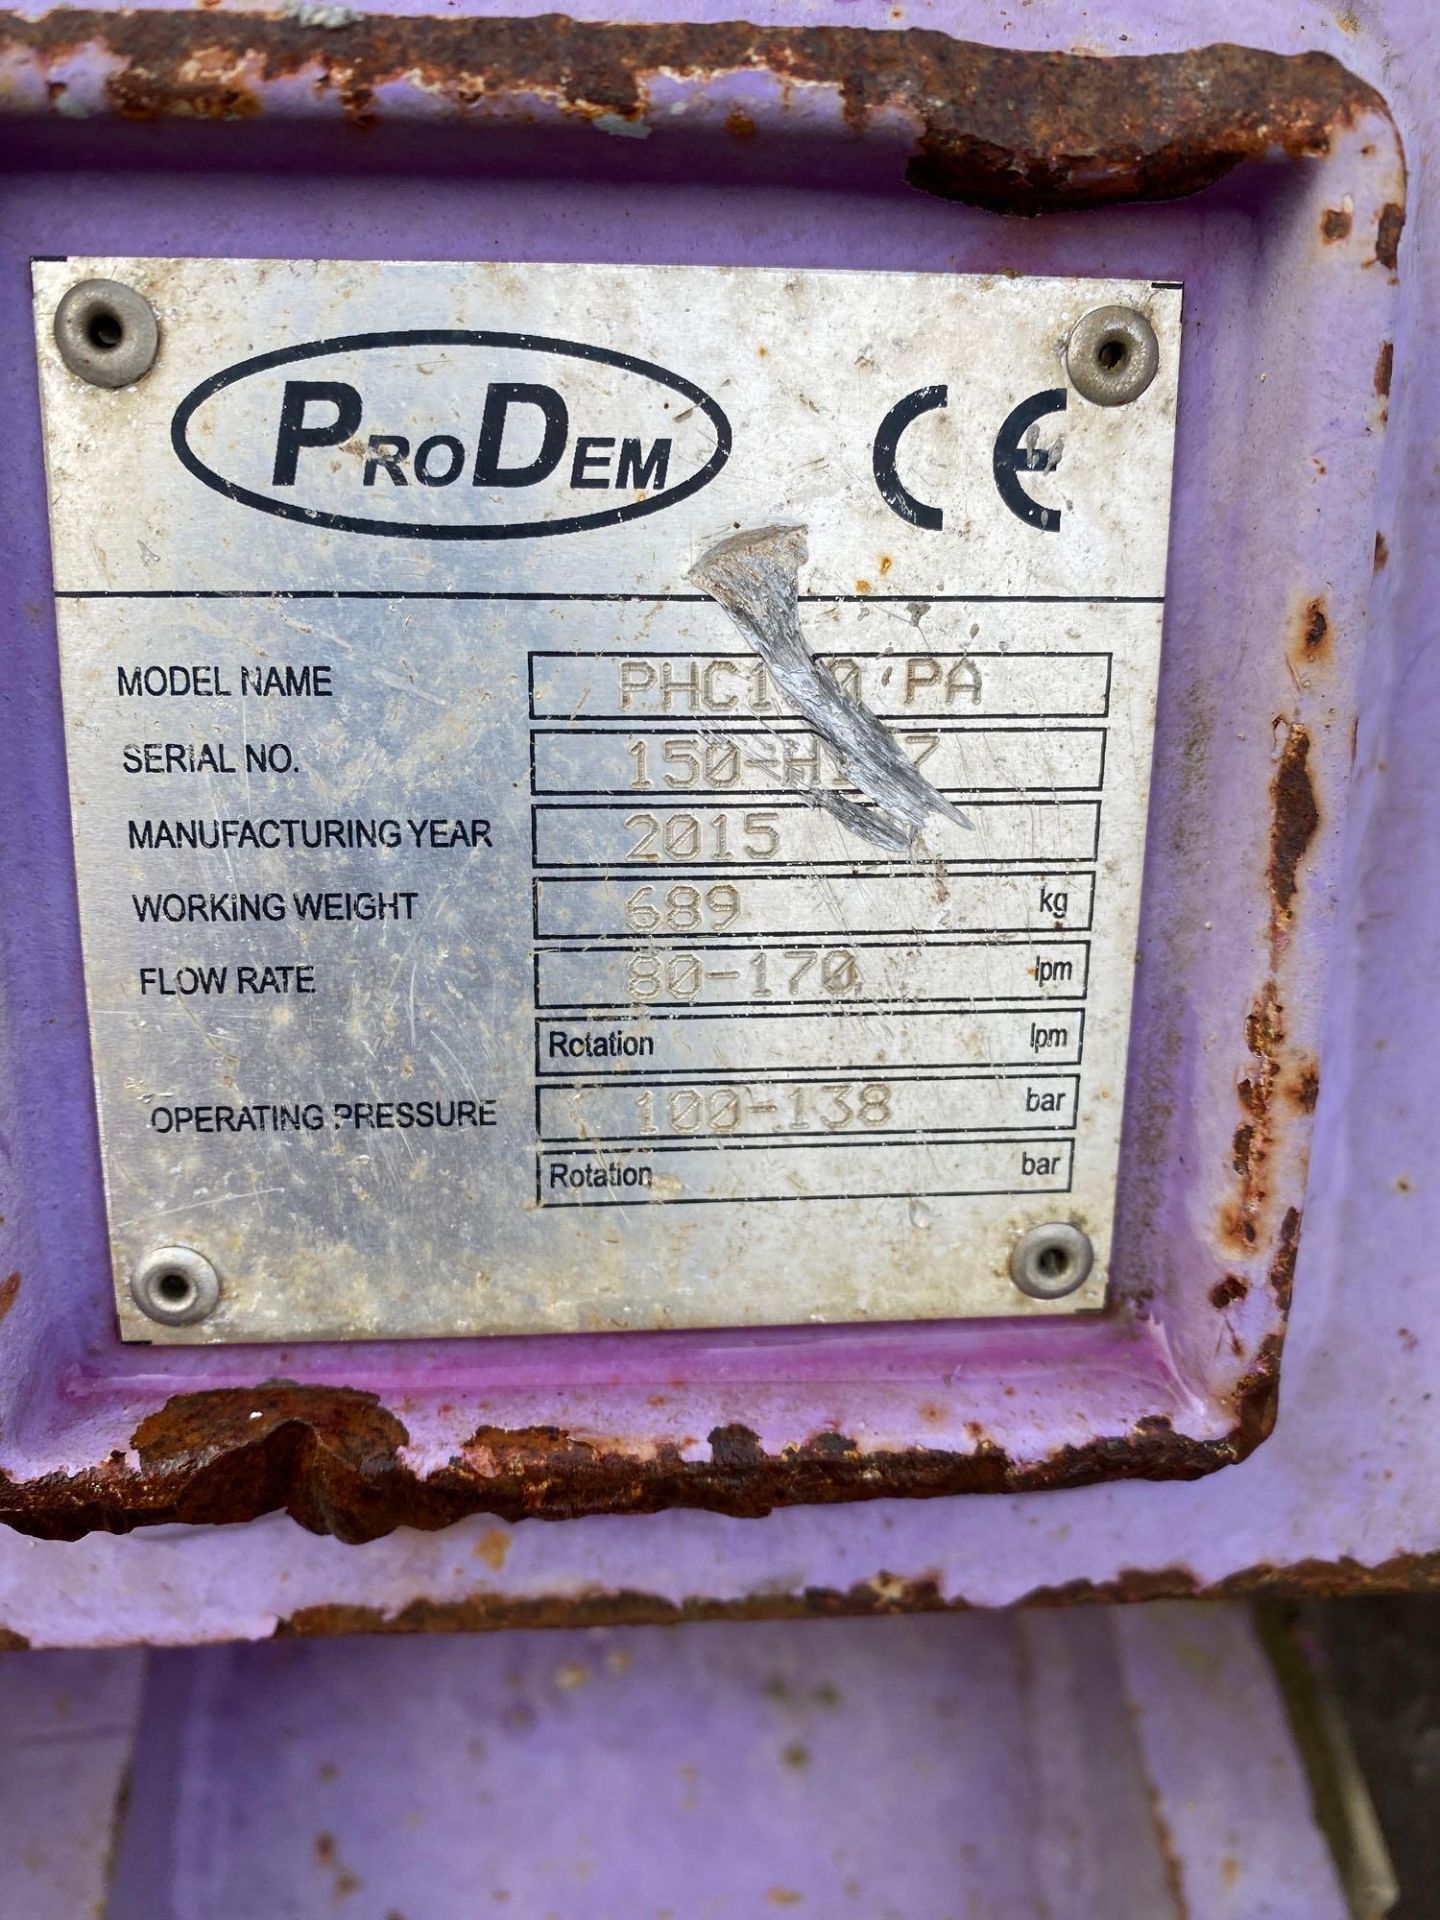 Pro Dem PHC150 excavator whacker plate date of manufacture 2015 - Image 2 of 4